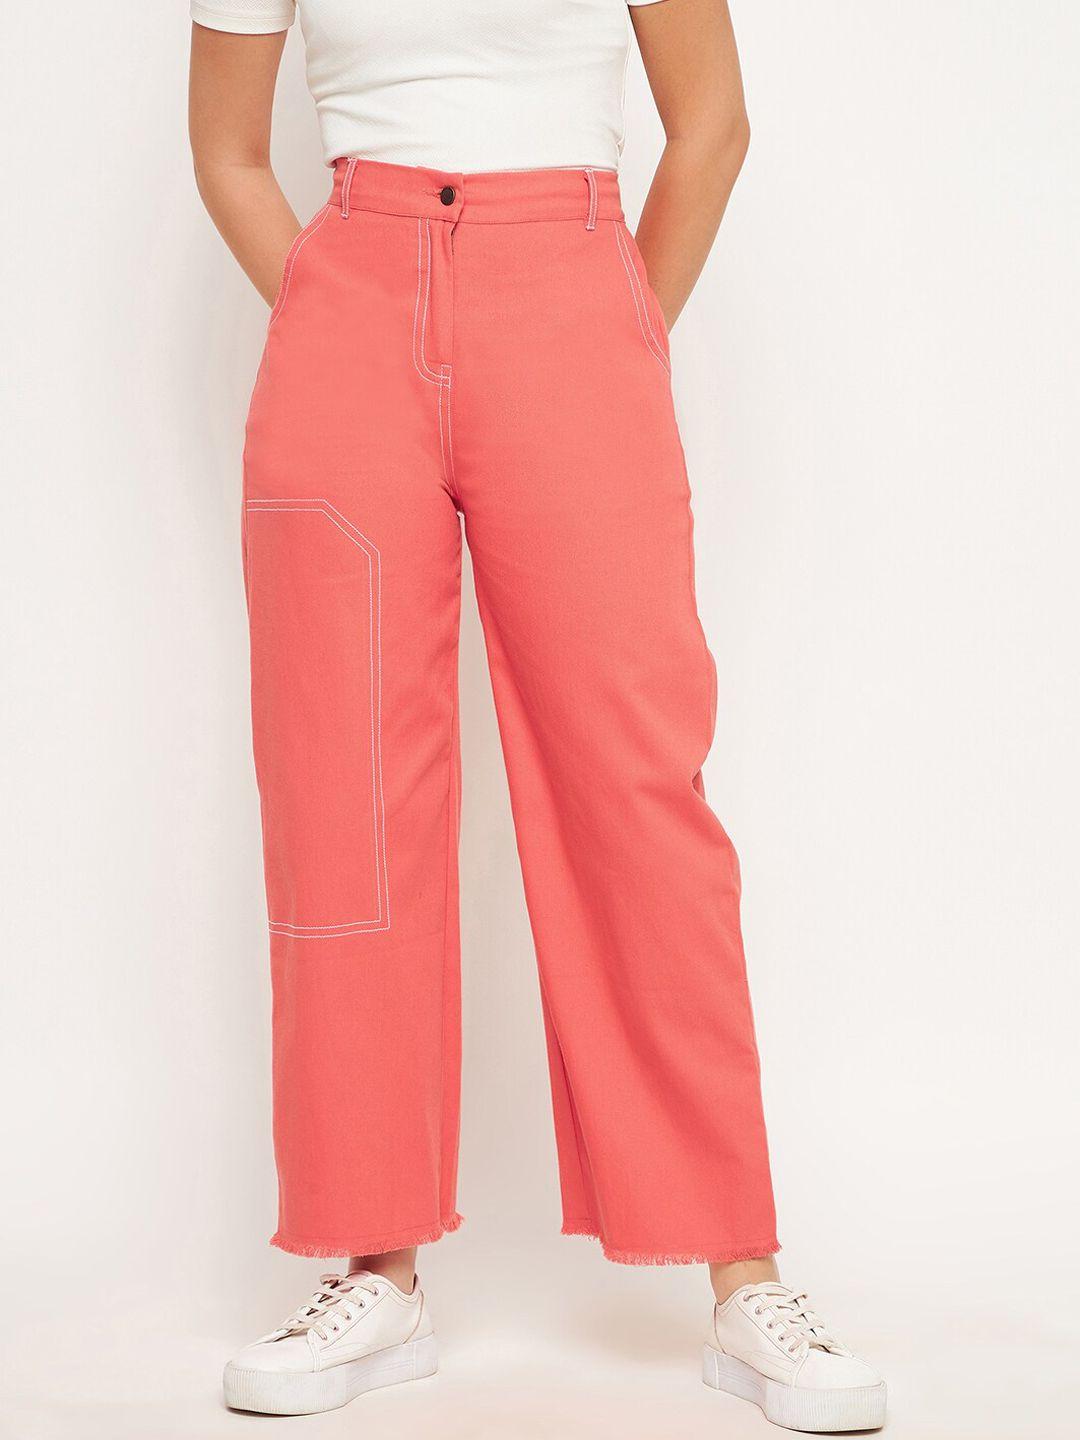 winered-women-peach-coloured-smart-straight-fit-high-rise-easy-wash-trousers